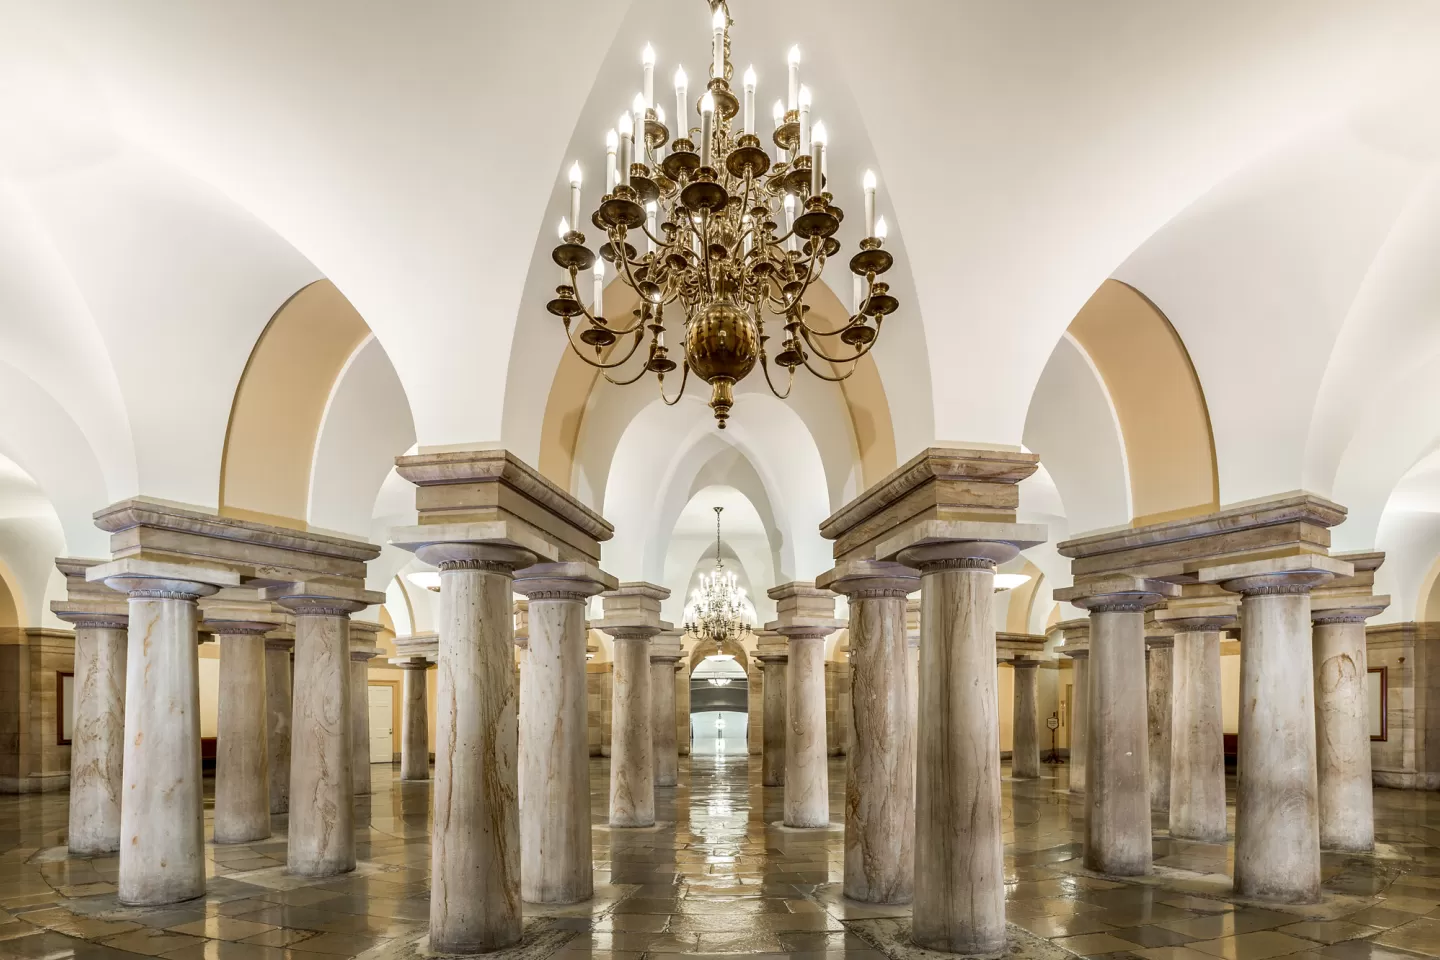 View of the Crypt in the U.S. Capitol.